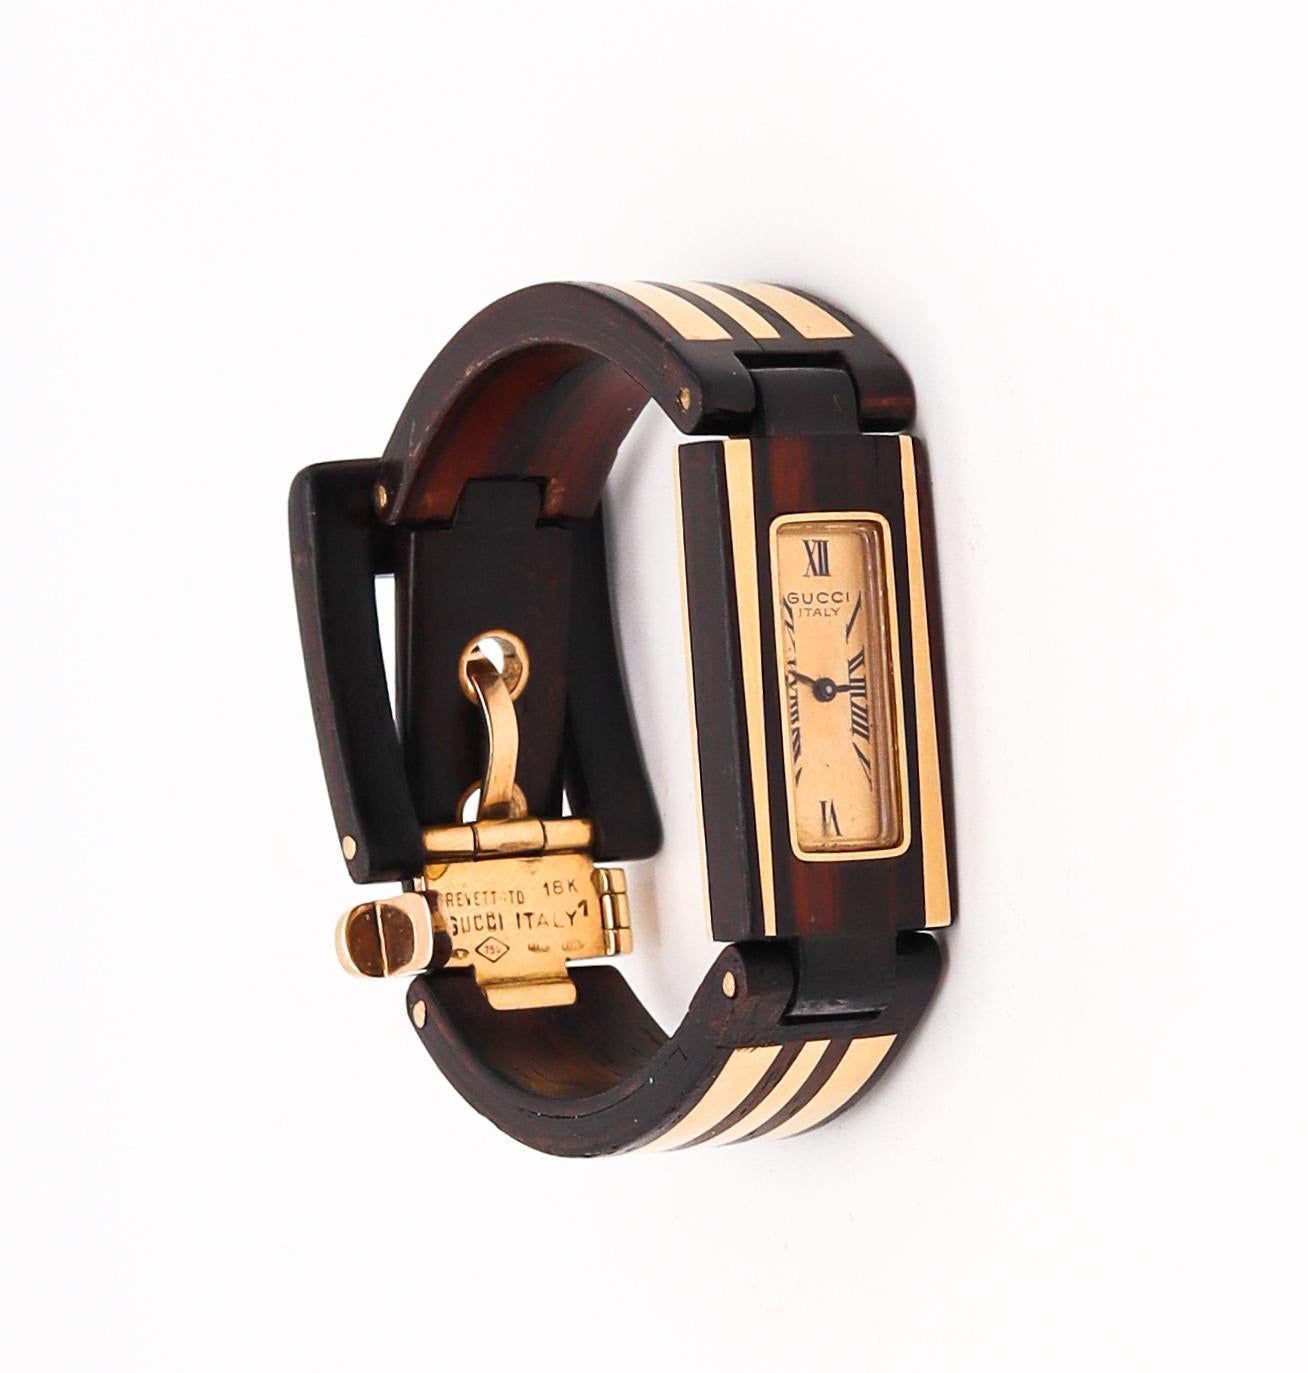 A retro wrist watch designed by Gucci France.

An extremely rare piece, created in Paris France by the house of Gucci, back in the 1968. This unusual buckle wrist watch was carefully crafted with parts carved in natural Macassar ebony wood and